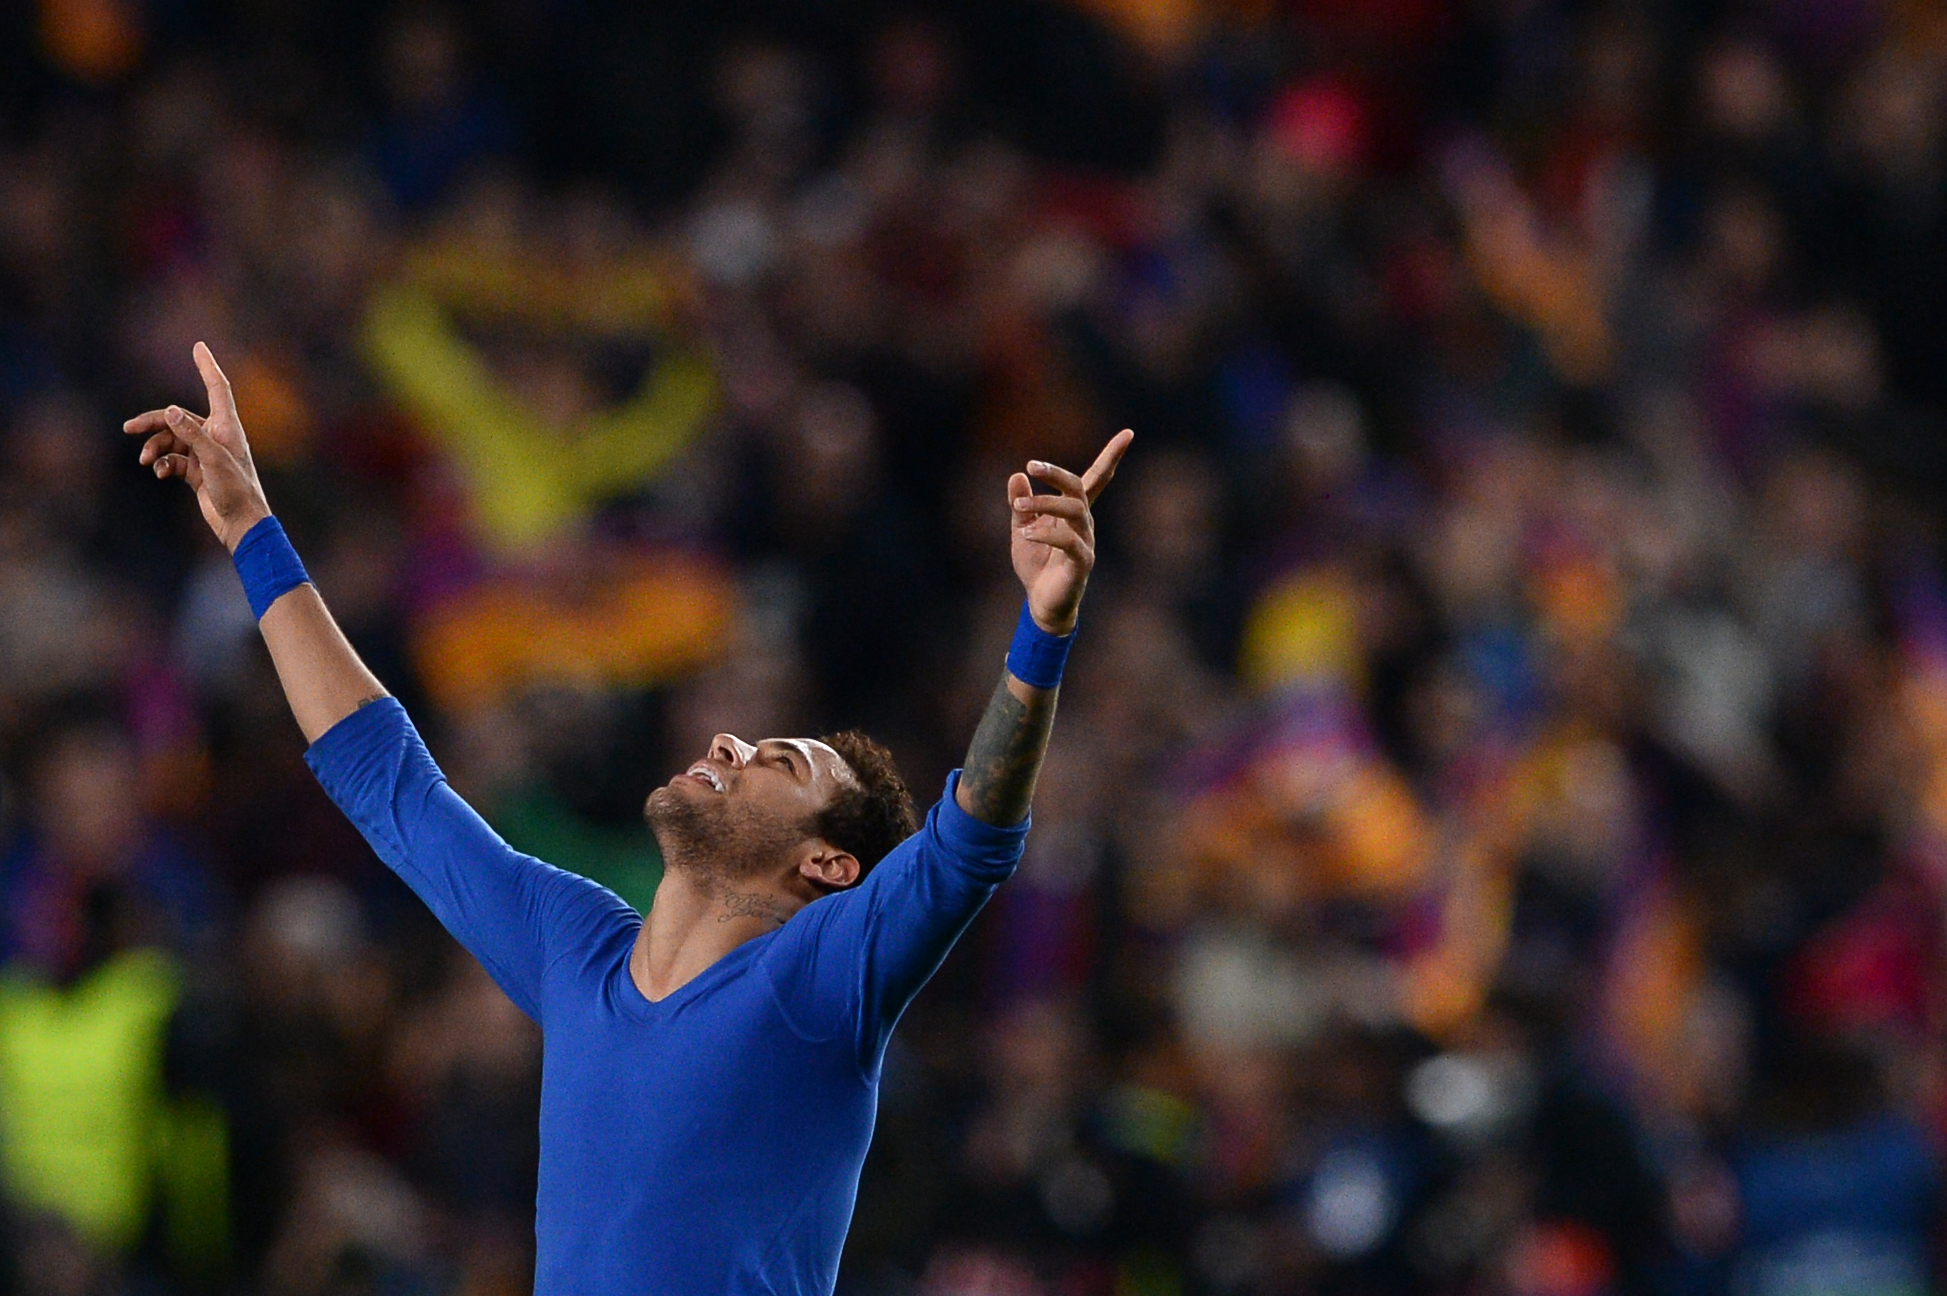 Barcelona's Brazilian forward Neymar celebrates their 6-1 victory at the end of the UEFA Champions League round of 16 second leg football match FC Barcelona vs Paris Saint-Germain FC at the Camp Nou stadium in Barcelona on March 8, 2017. / AFP PHOTO / Josep Lago        (Photo credit should read JOSEP LAGO/AFP/Getty Images)